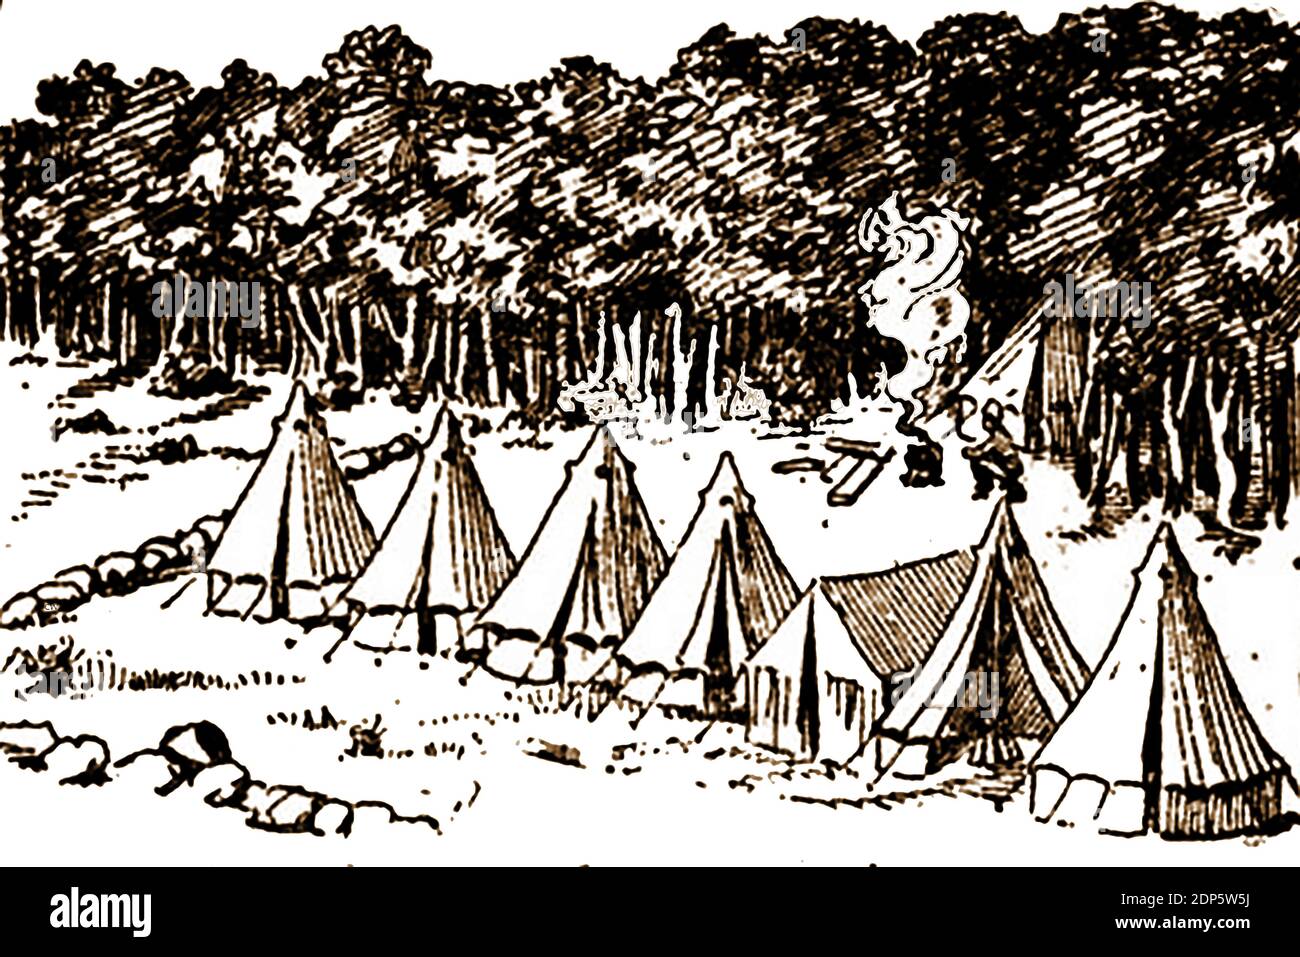 A sketch of the 7th company camp at Daspoort in 1900, now a suburb of City of Tshwane. It was  created in 1897 on the farm area of the same name. The area was discovered in 1836 by Andries Pretorius and named after the rock hyrax or Dassie, a medium-sized terrestrial mammal native to Africa and the Middle East . The nearby Daspoort Tunnel is named after the suburb. Stock Photo